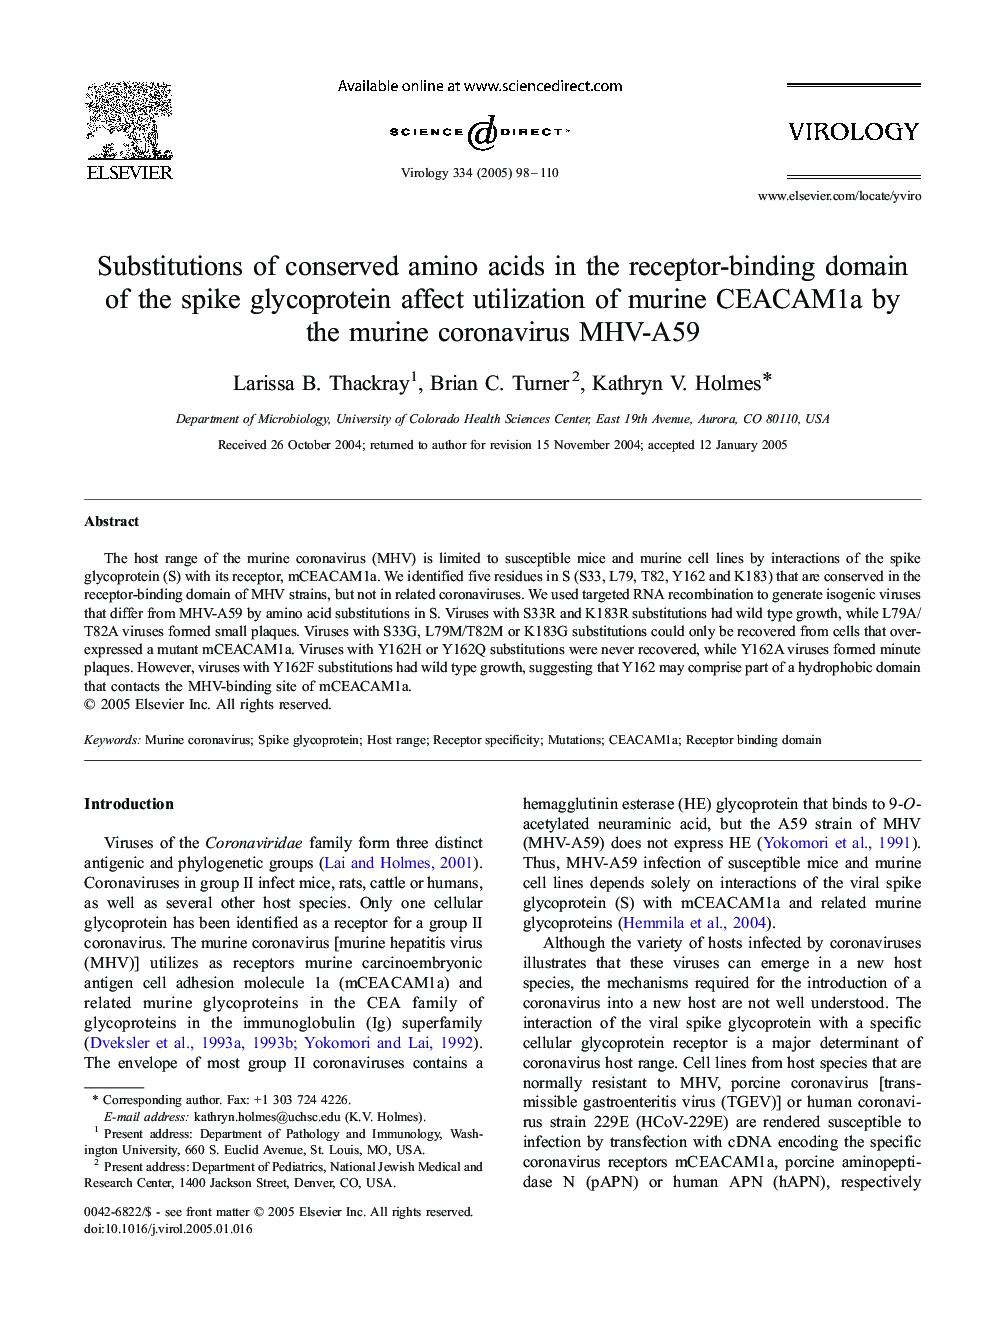 Substitutions of conserved amino acids in the receptor-binding domain of the spike glycoprotein affect utilization of murine CEACAM1a by the murine coronavirus MHV-A59